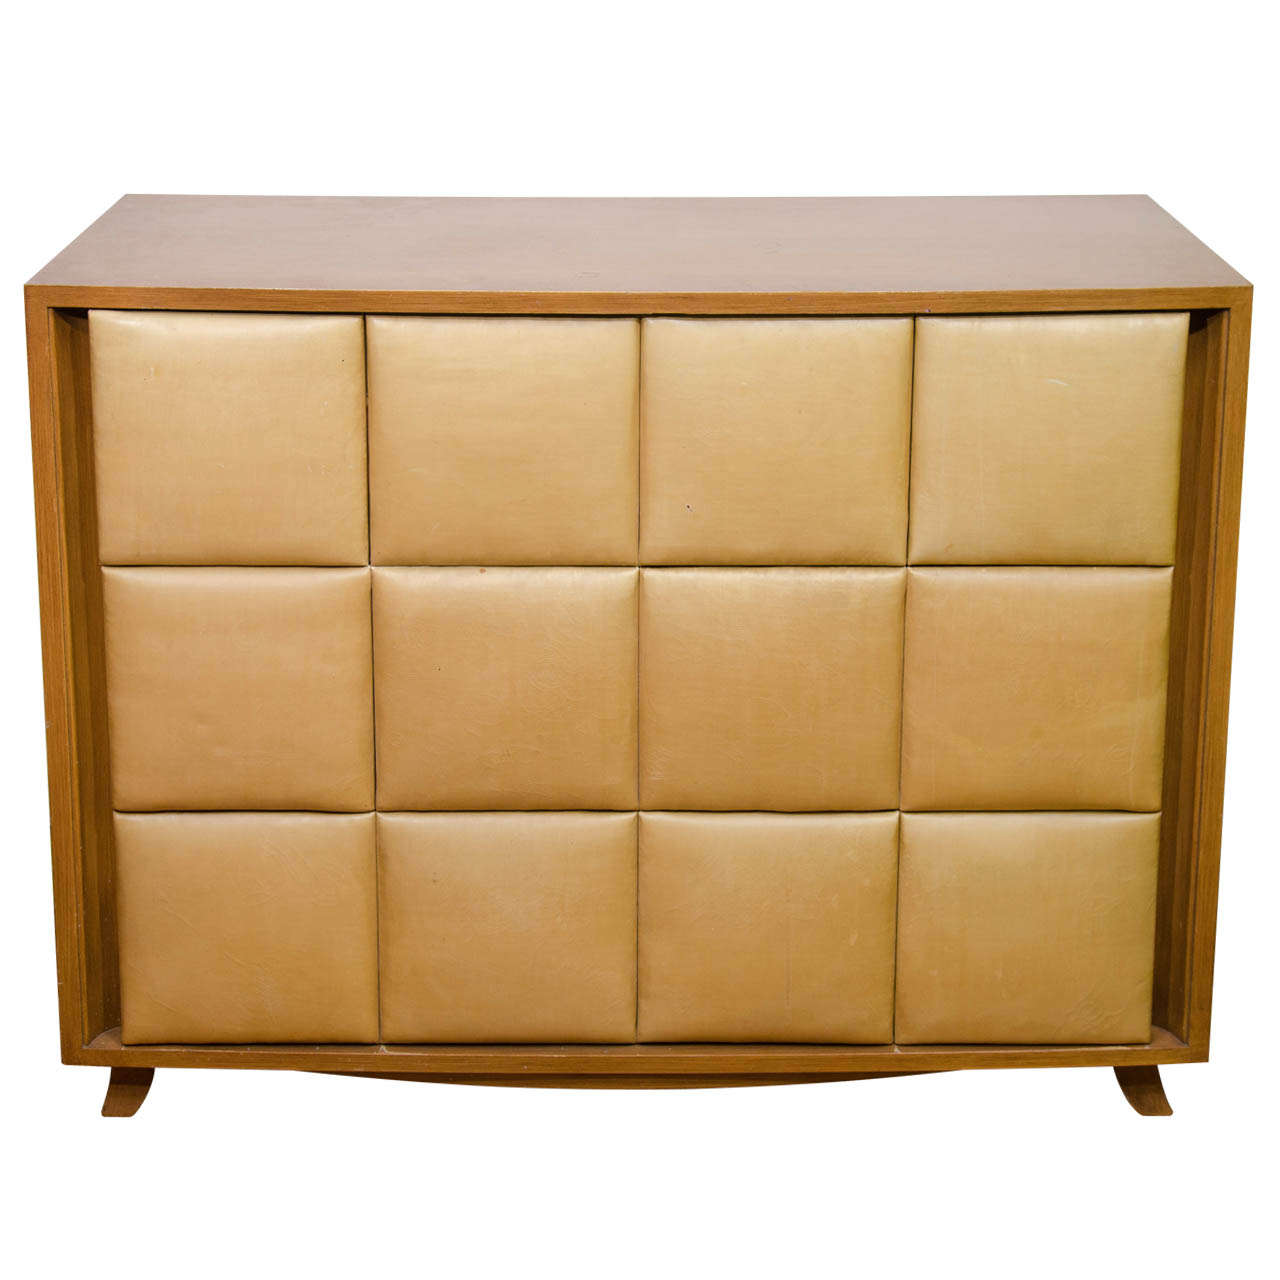 An Art Deco Chest of Drawers by Gilbert Rohde for Herman Miller